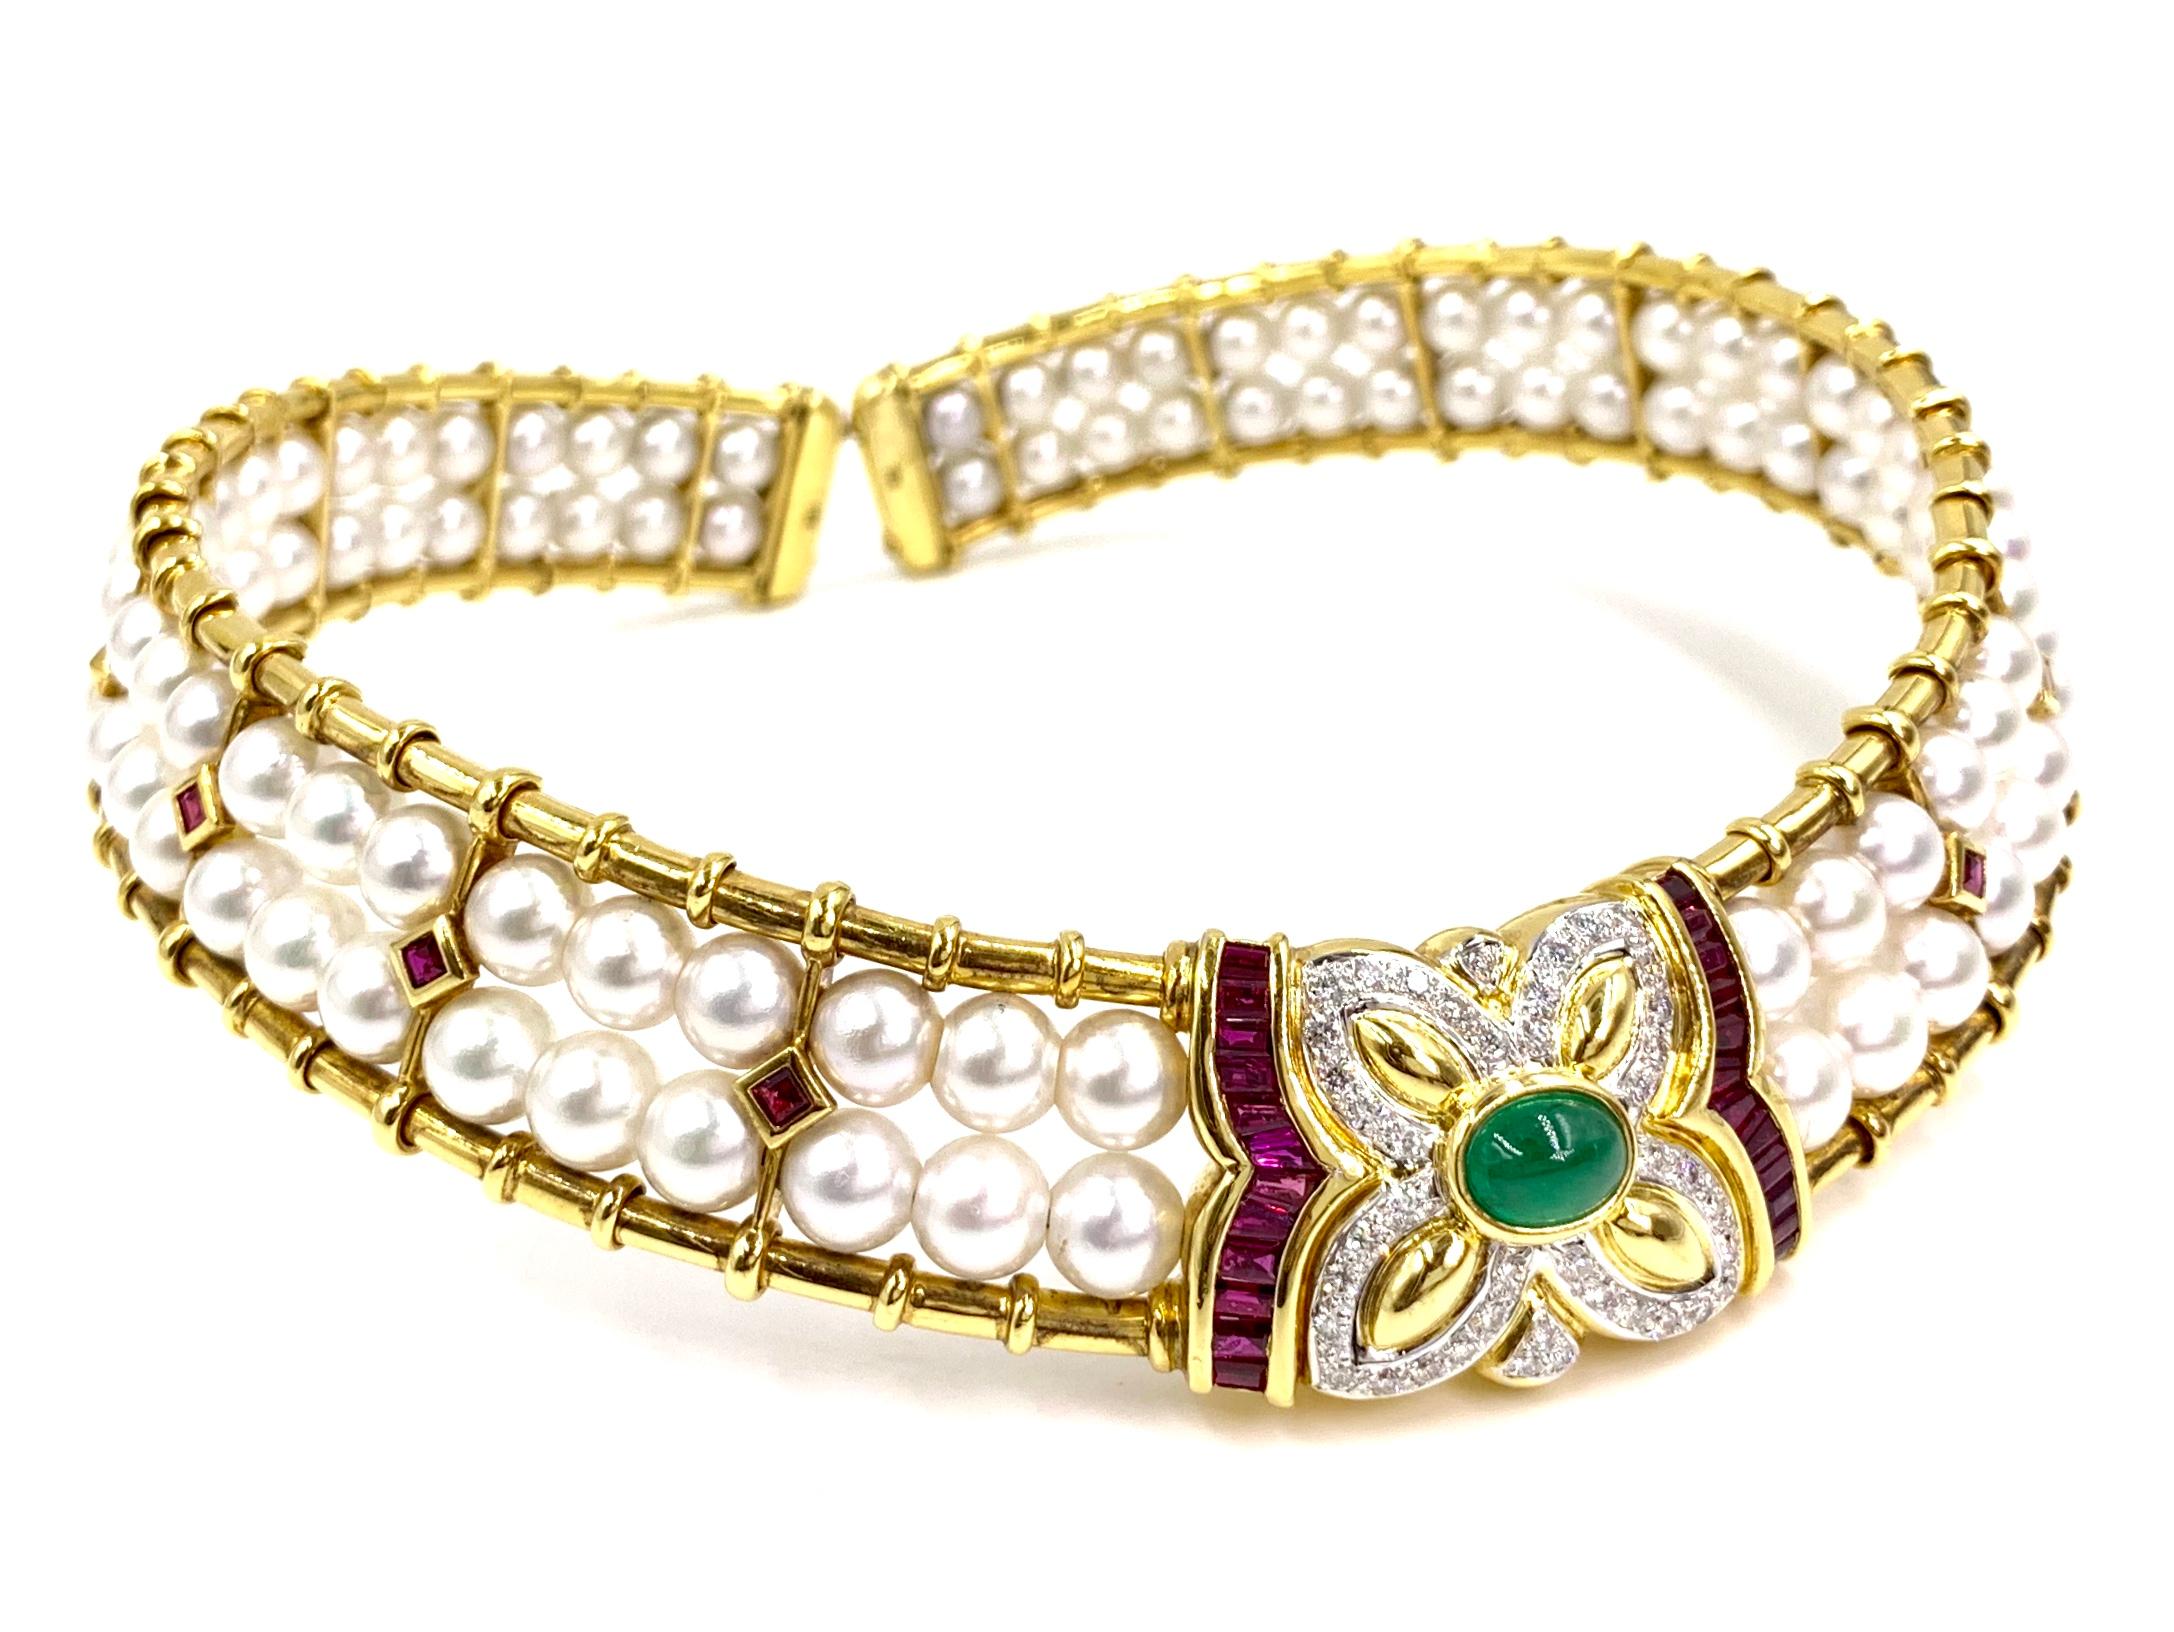 Very well made flexible 18 karat yellow gold Victorian inspired choker necklace featuring two rows of lustrous 6.5mm natural pearls, a cabochon emerald, rubies and white diamonds. Vivid green cabochon emerald weighs 1.36 carats. 30 rubies have a